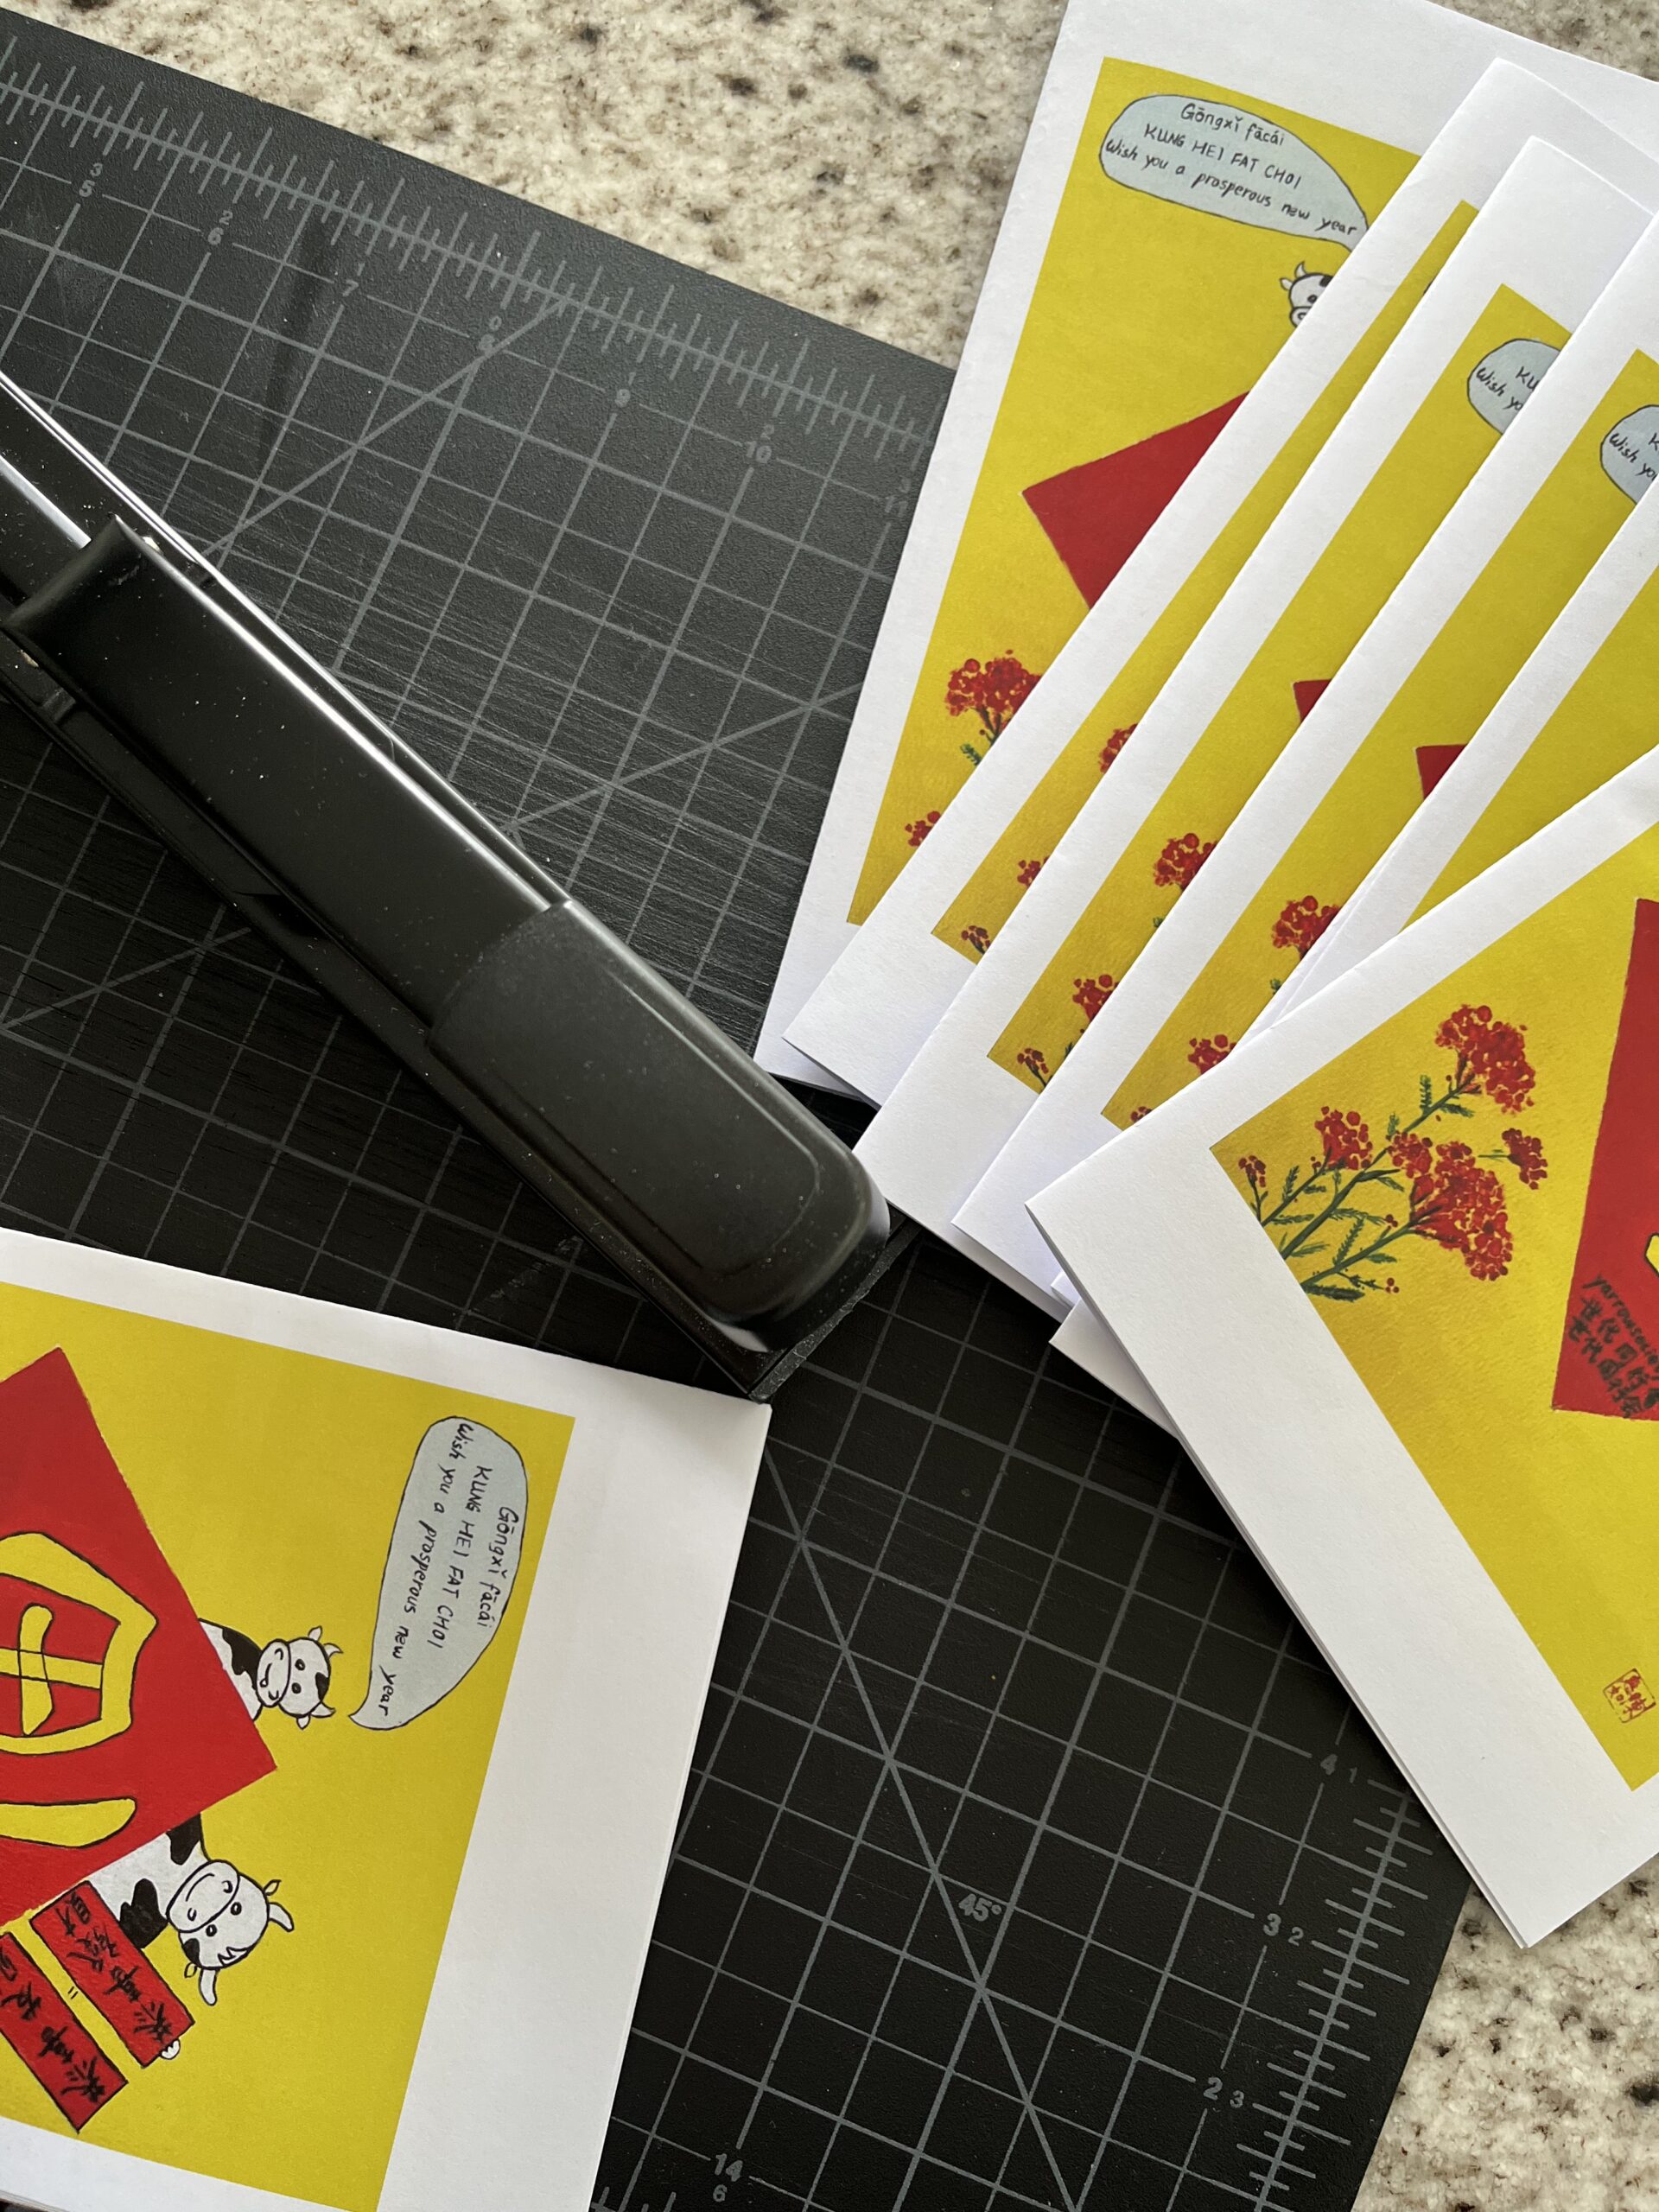 Copies of Sticky Rice's Lunar New Year zine spread out on a table ready to be cut to size.